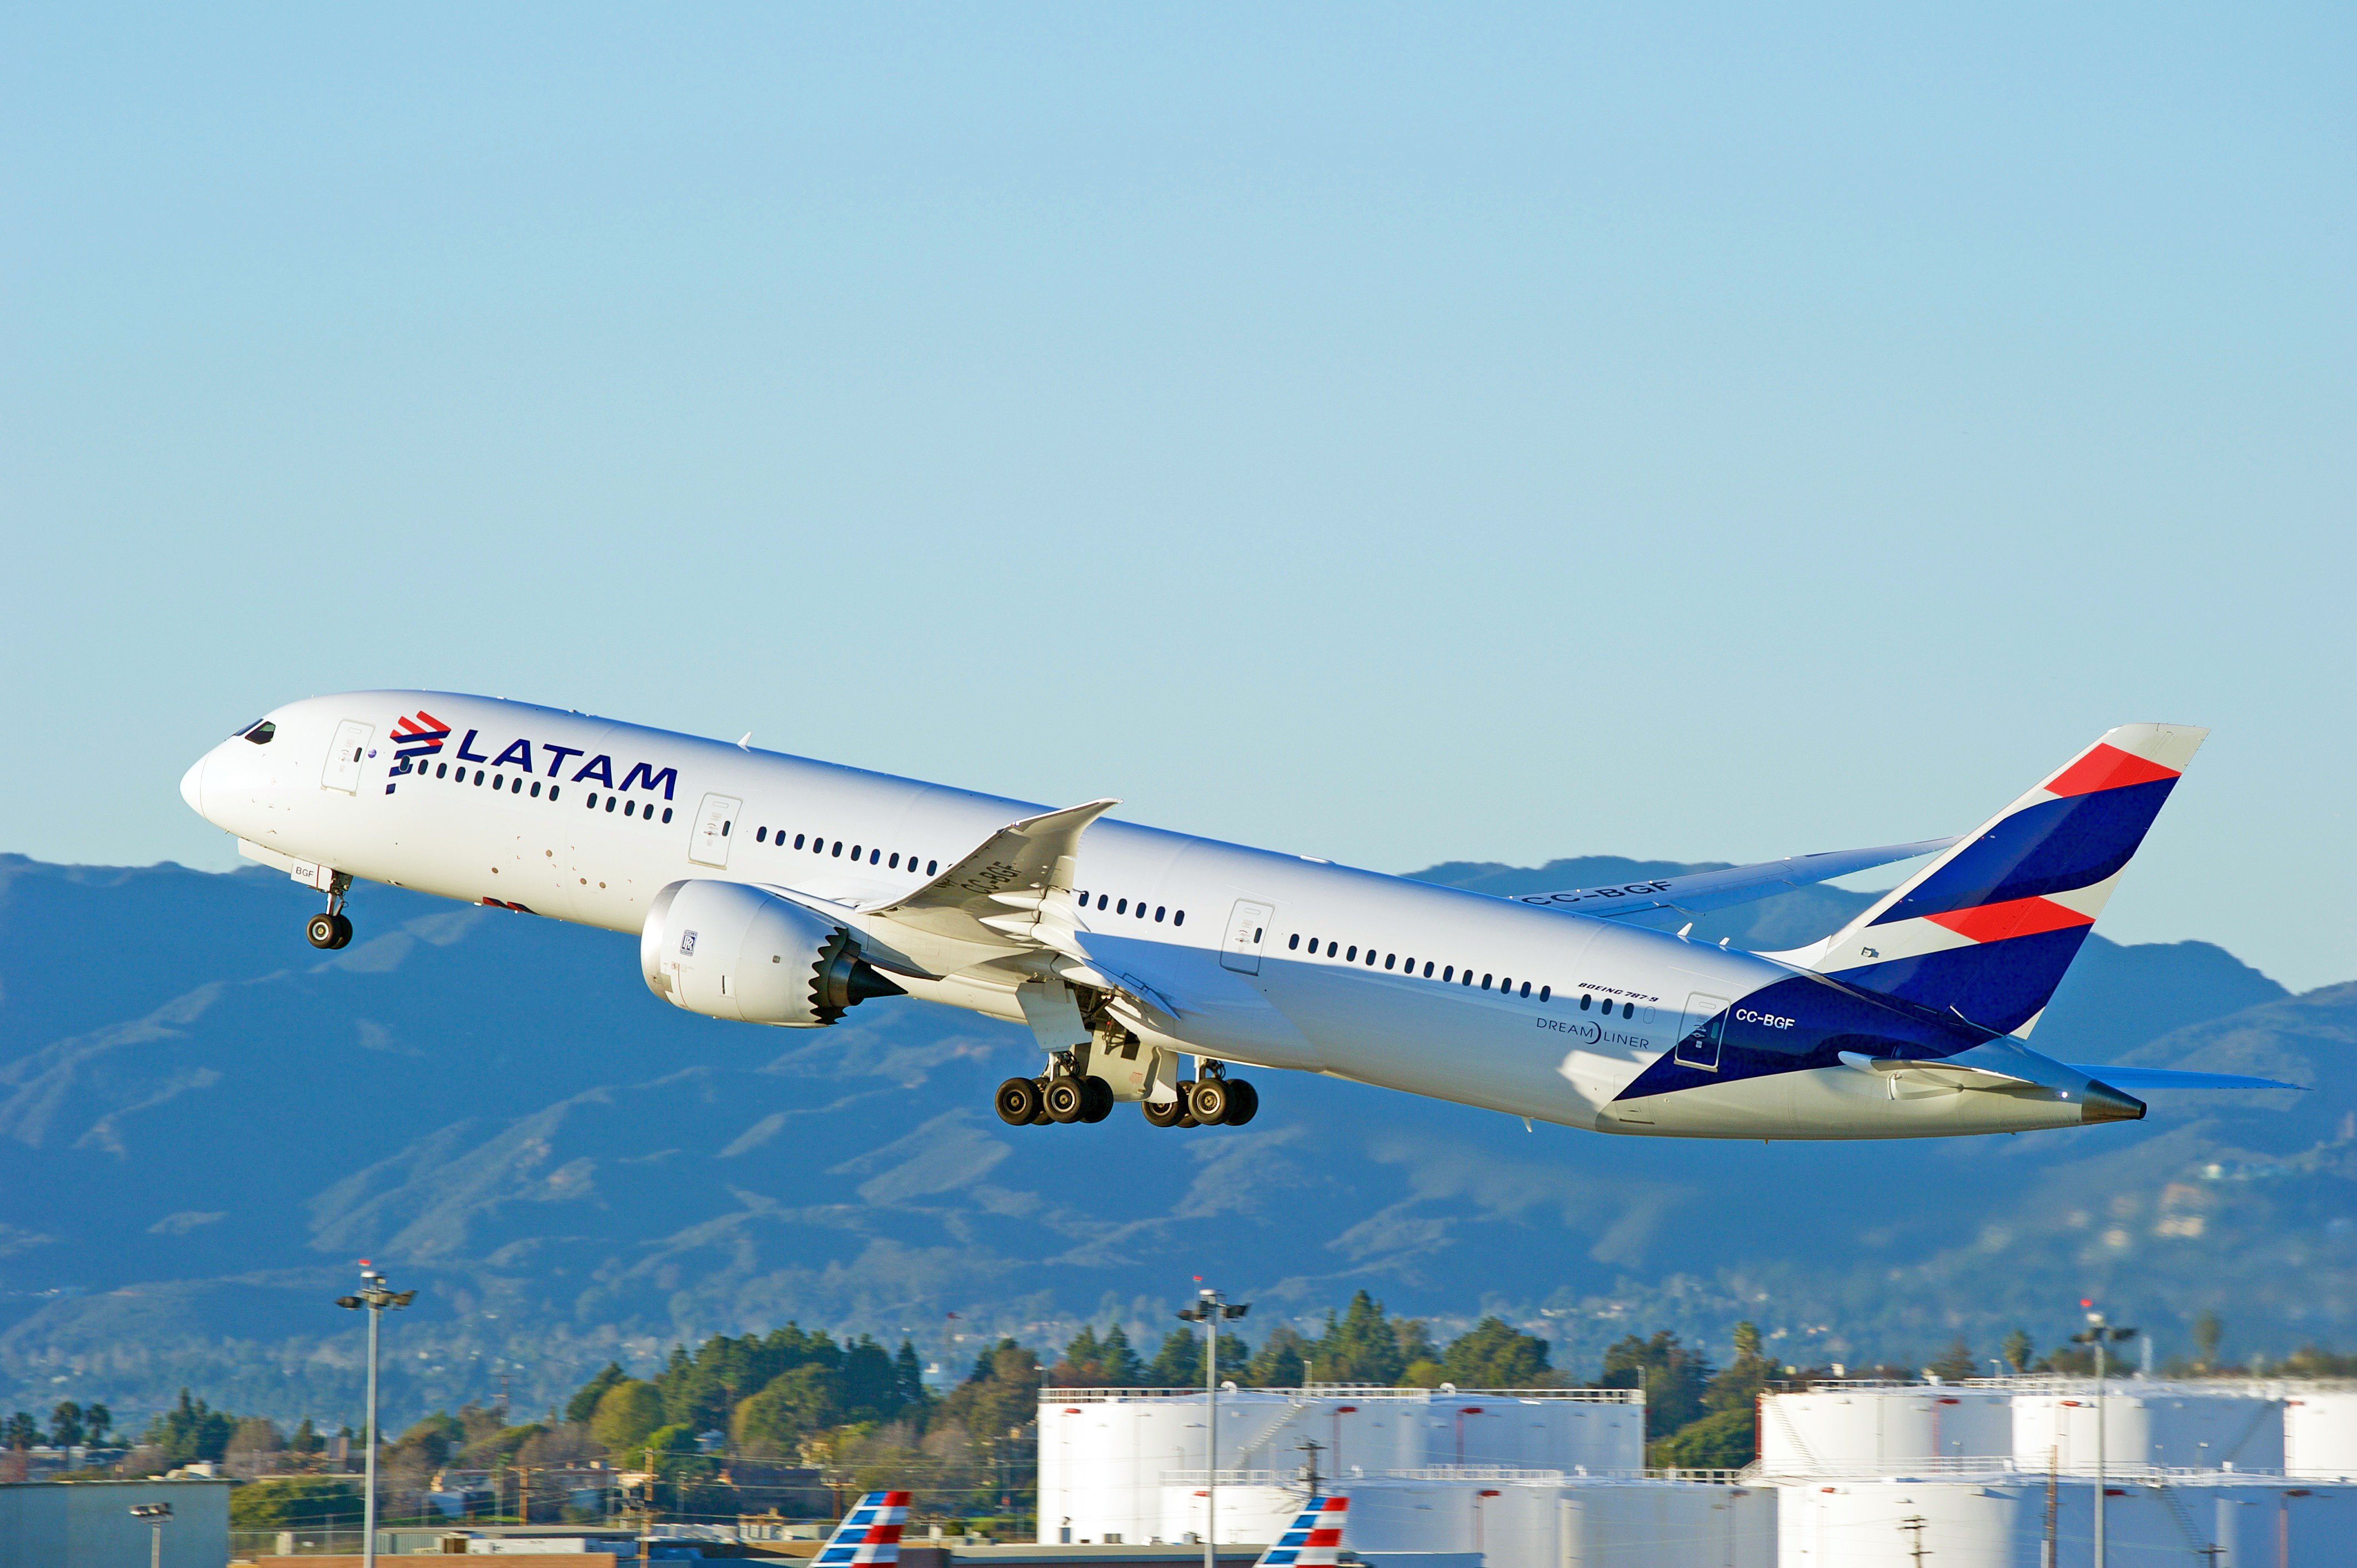 LATAM Brasil Transported More Than 120,000 Passengers To Italy Last Year